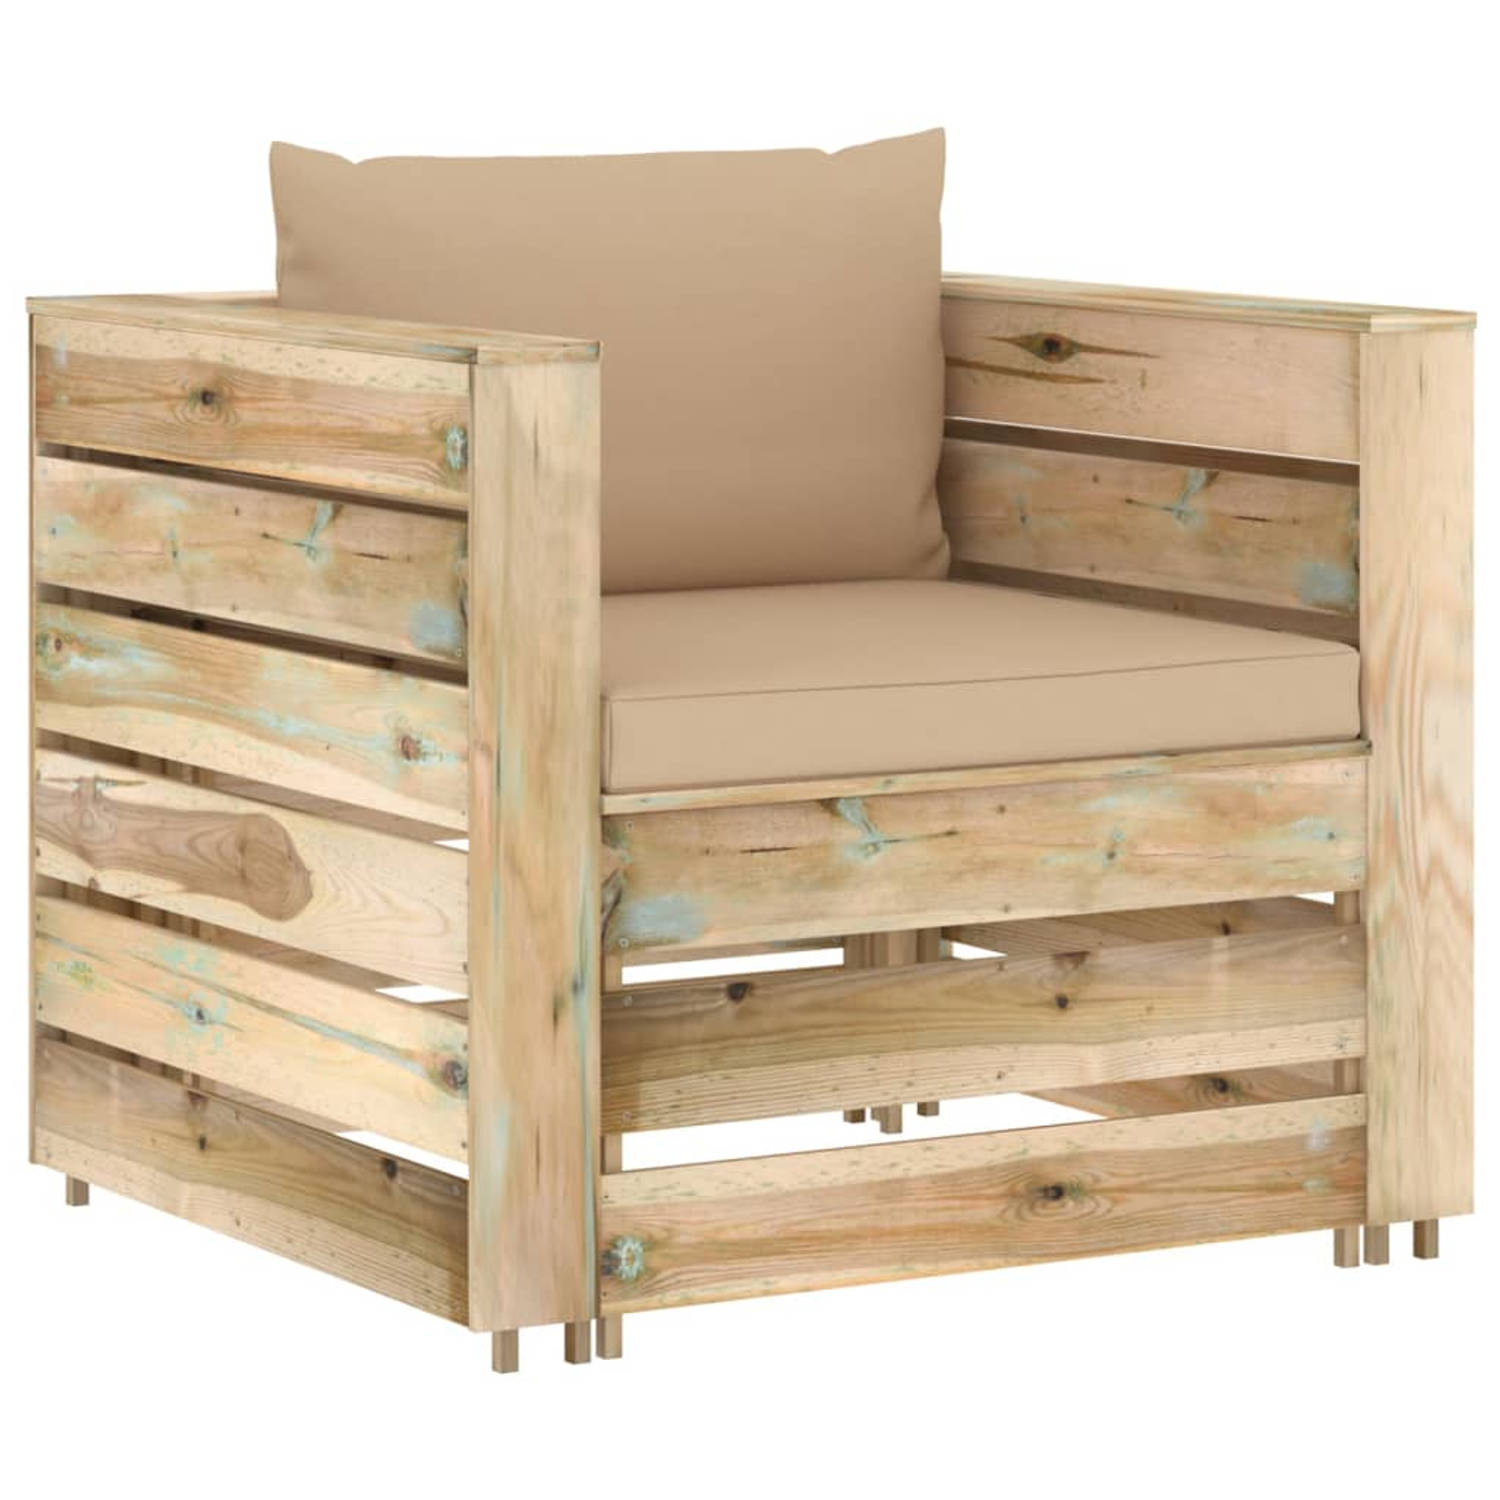 The Living Store - Pallet Loungeset - Tuinmeubelen - 77x70x66 cm - Grenenhout